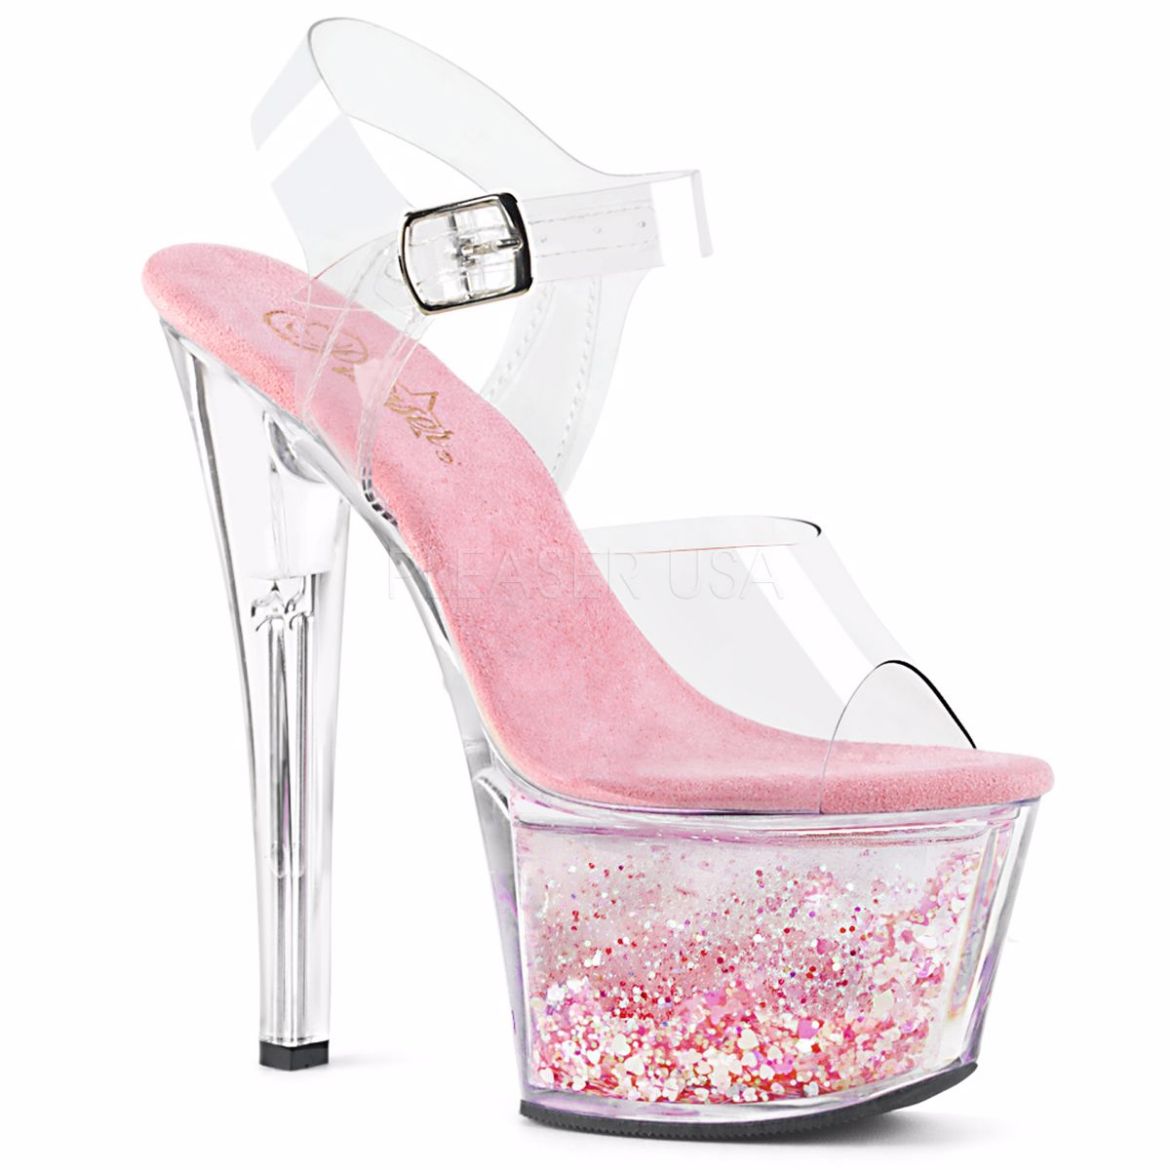 Product image of Pleaser Sky-308Whg Clear/Clear-Baby Pink Glitter, 7 inch (17.8 cm) Heel, 2 3/4 inch (7 cm) Platform Sandal Shoes